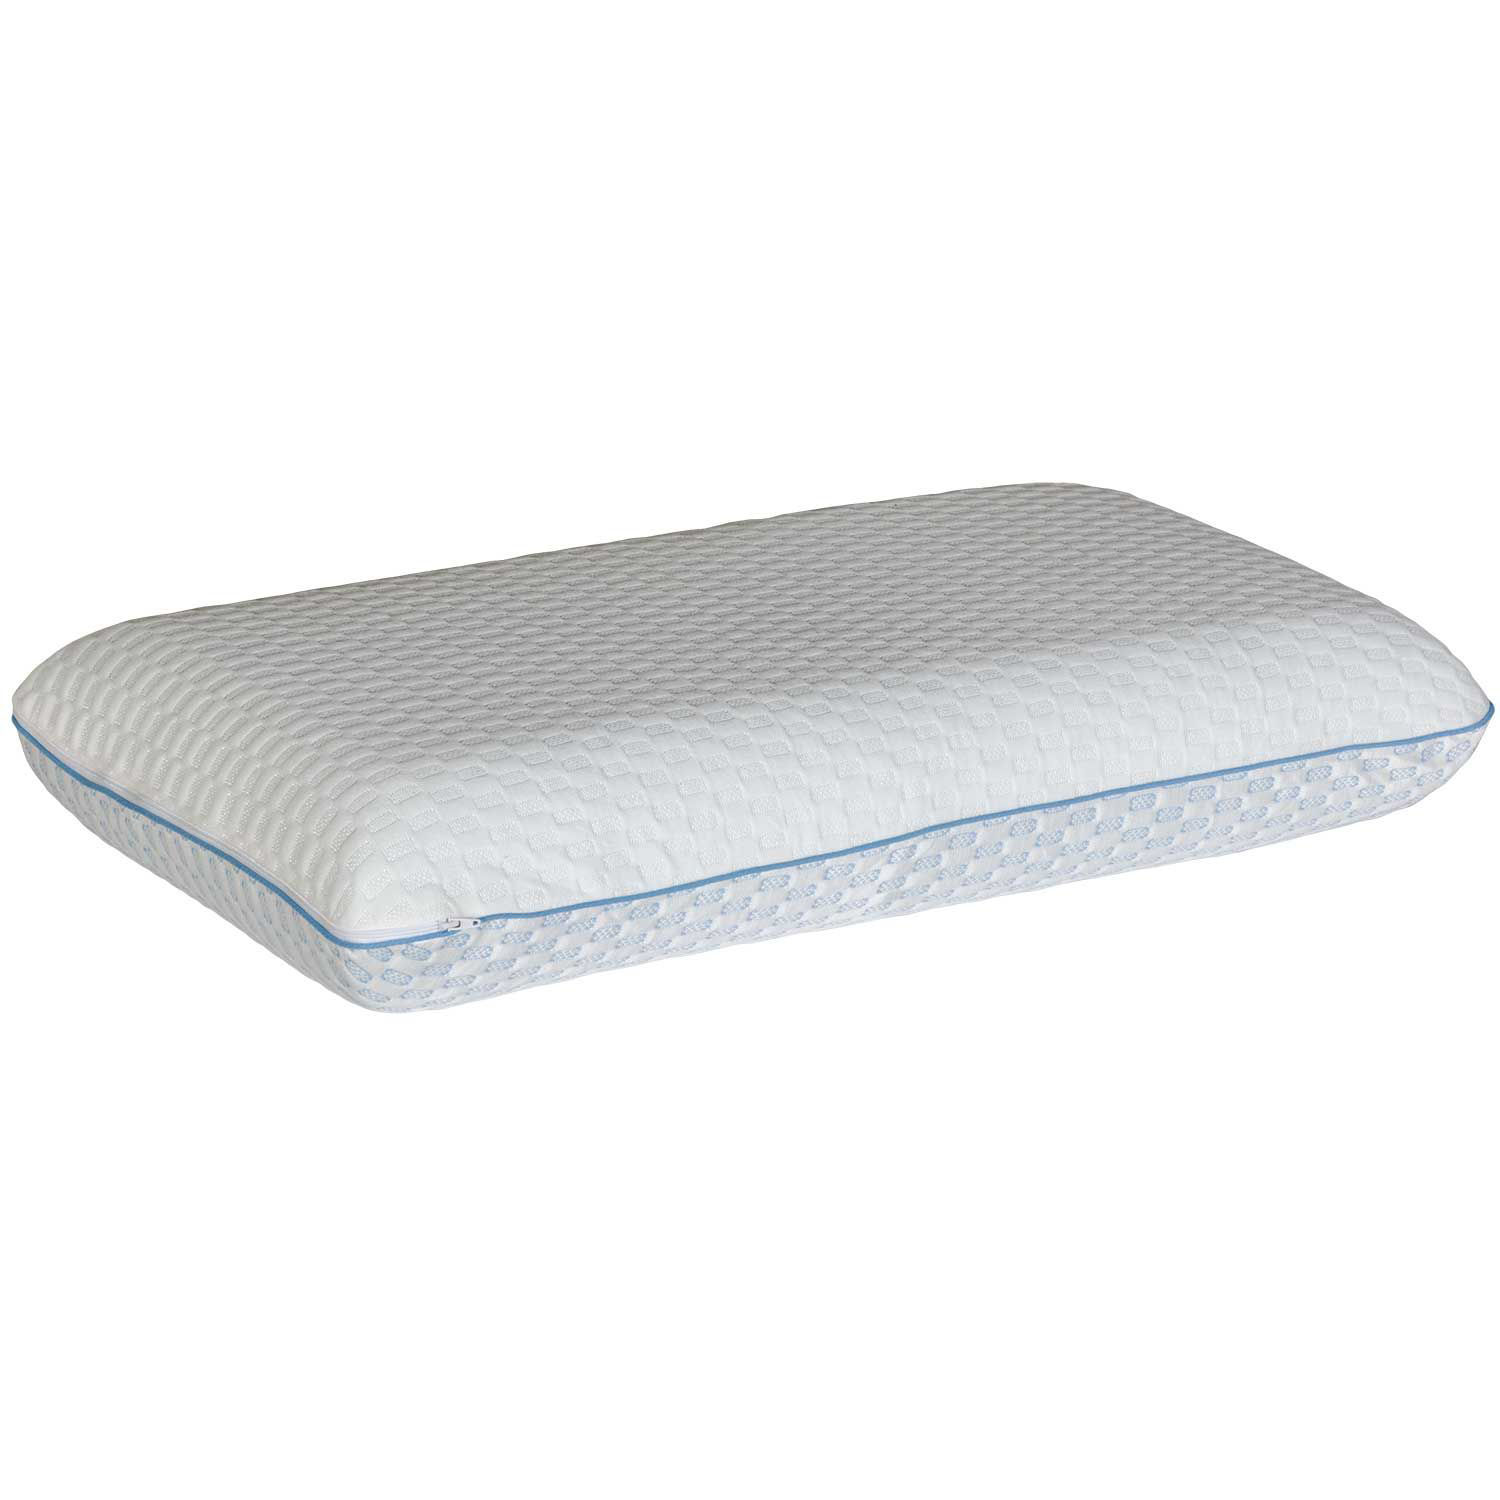 https://www.afw.com/images/thumbs/0121213_reversible-cooling-queen-memory-foam-pillow.jpeg